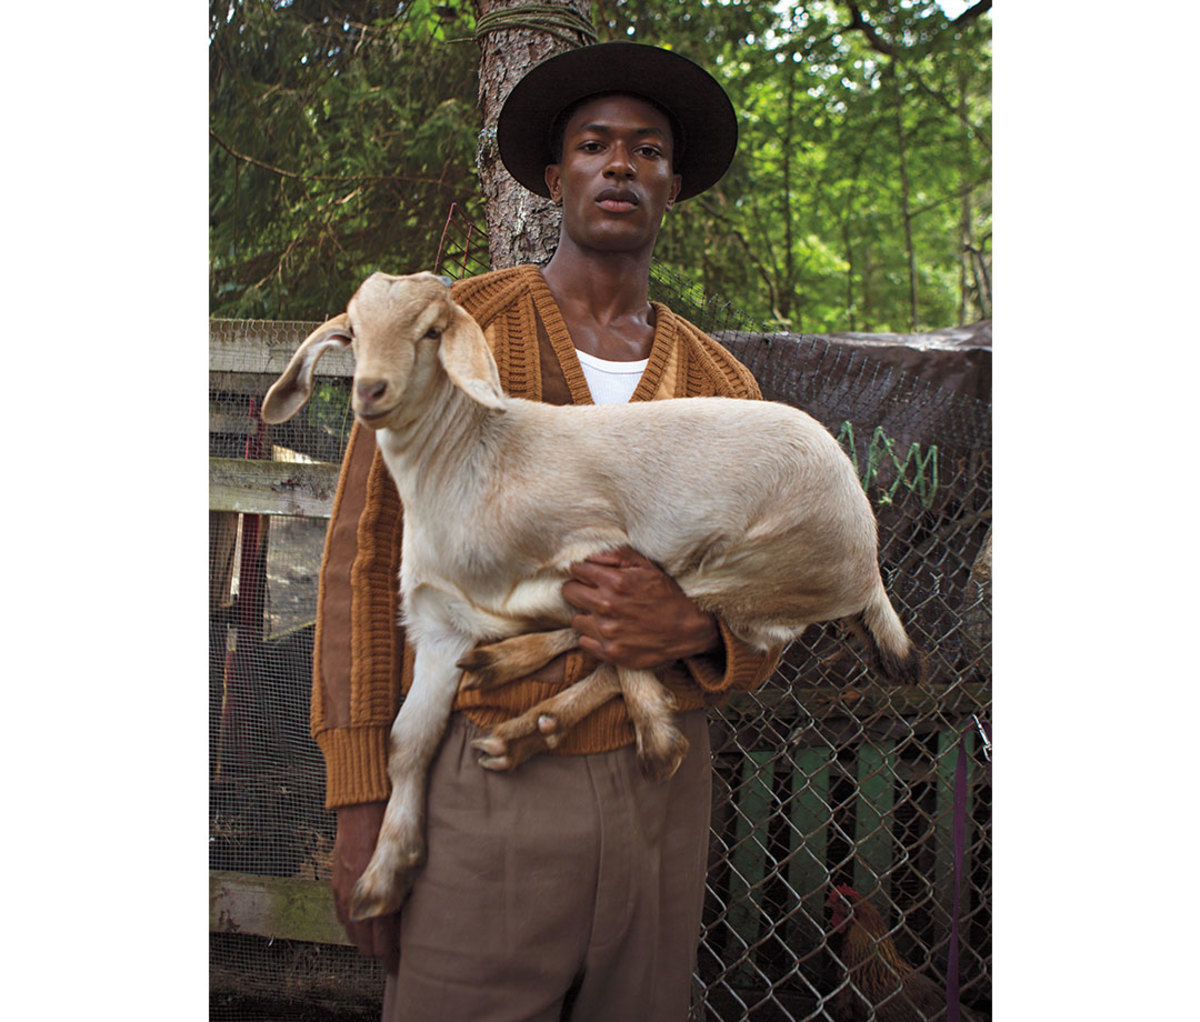 Black man in hat and auburn sweater holding a goat